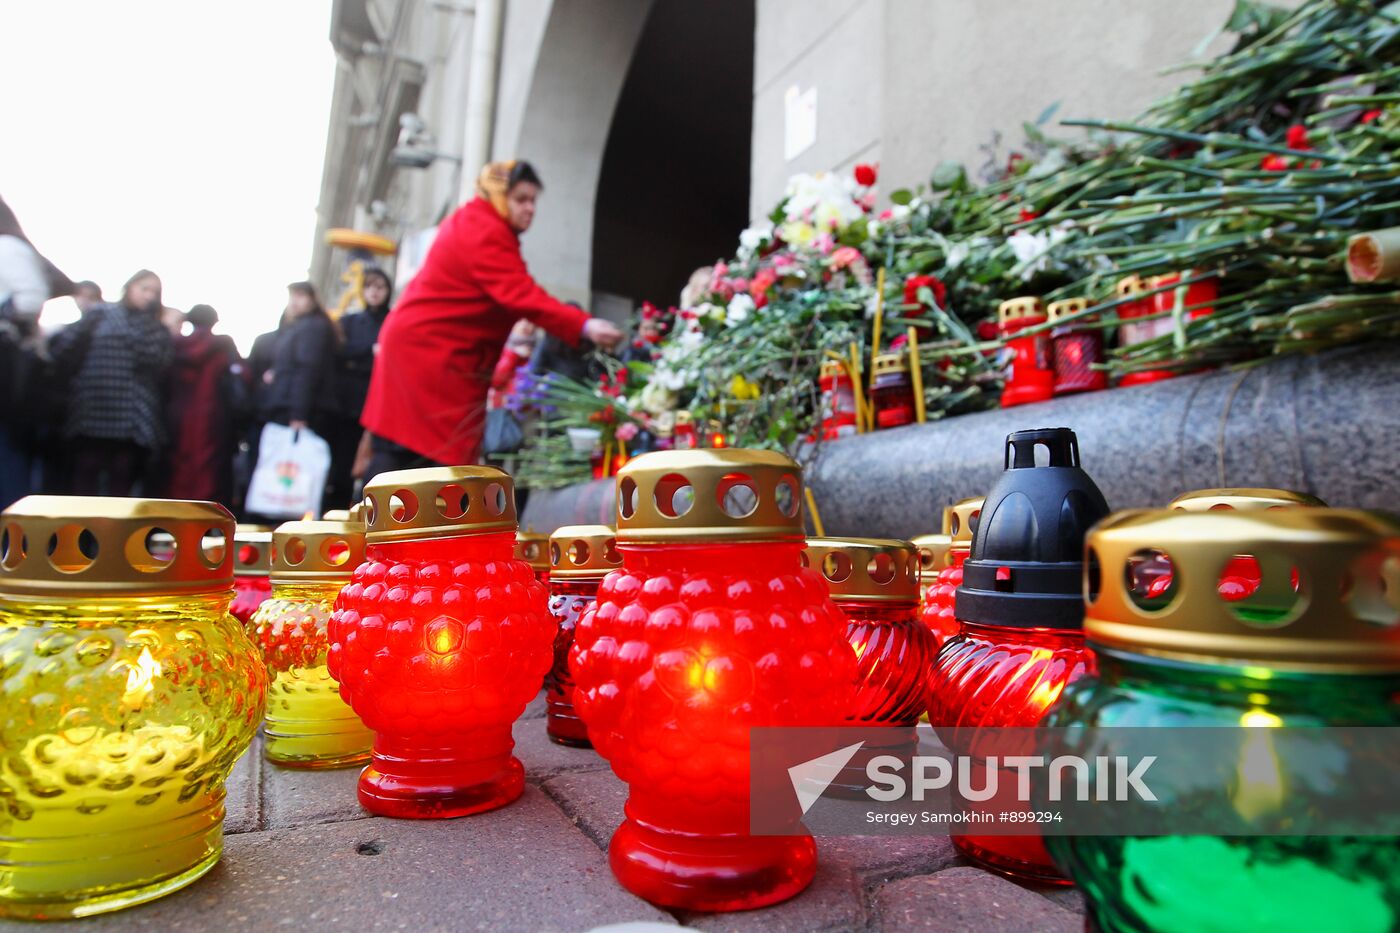 Flowers laid in tribute to Minsk blast victims